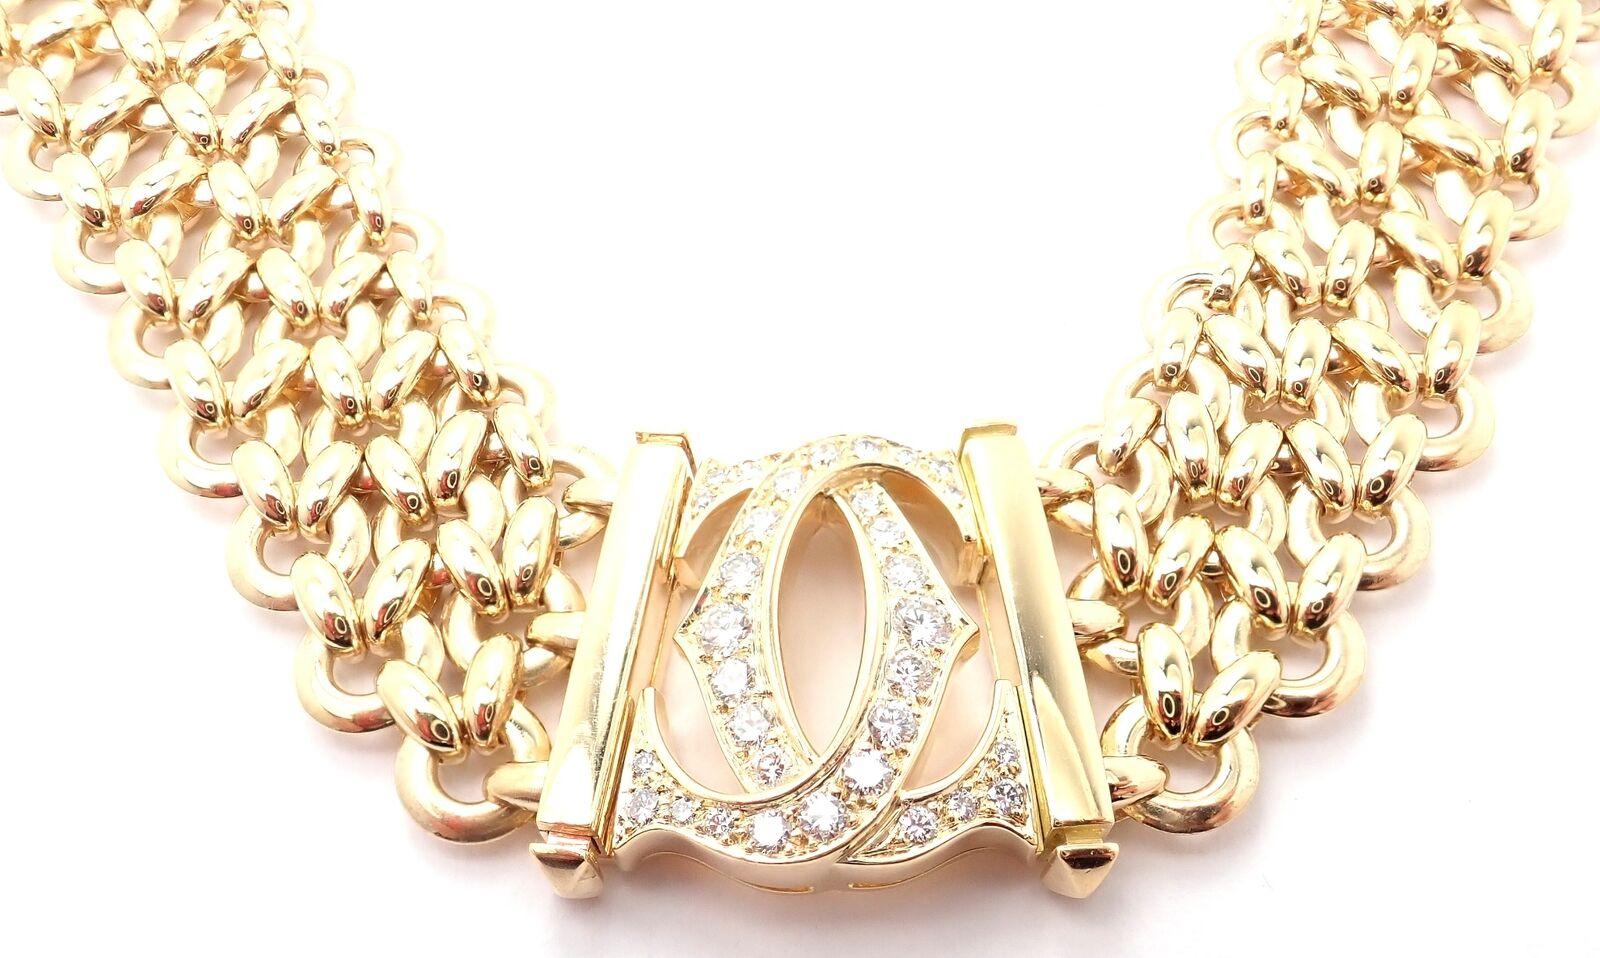 18k Yellow Gold Penelope Double C Diamond Three Row Necklace by Cartier. 
With 16 round brilliant cut diamonds VVS1 clarity, E color total weight approximately .70ct
This stunning necklace comes with a Cartier box.
Details: 
Weight: 132.8 grams